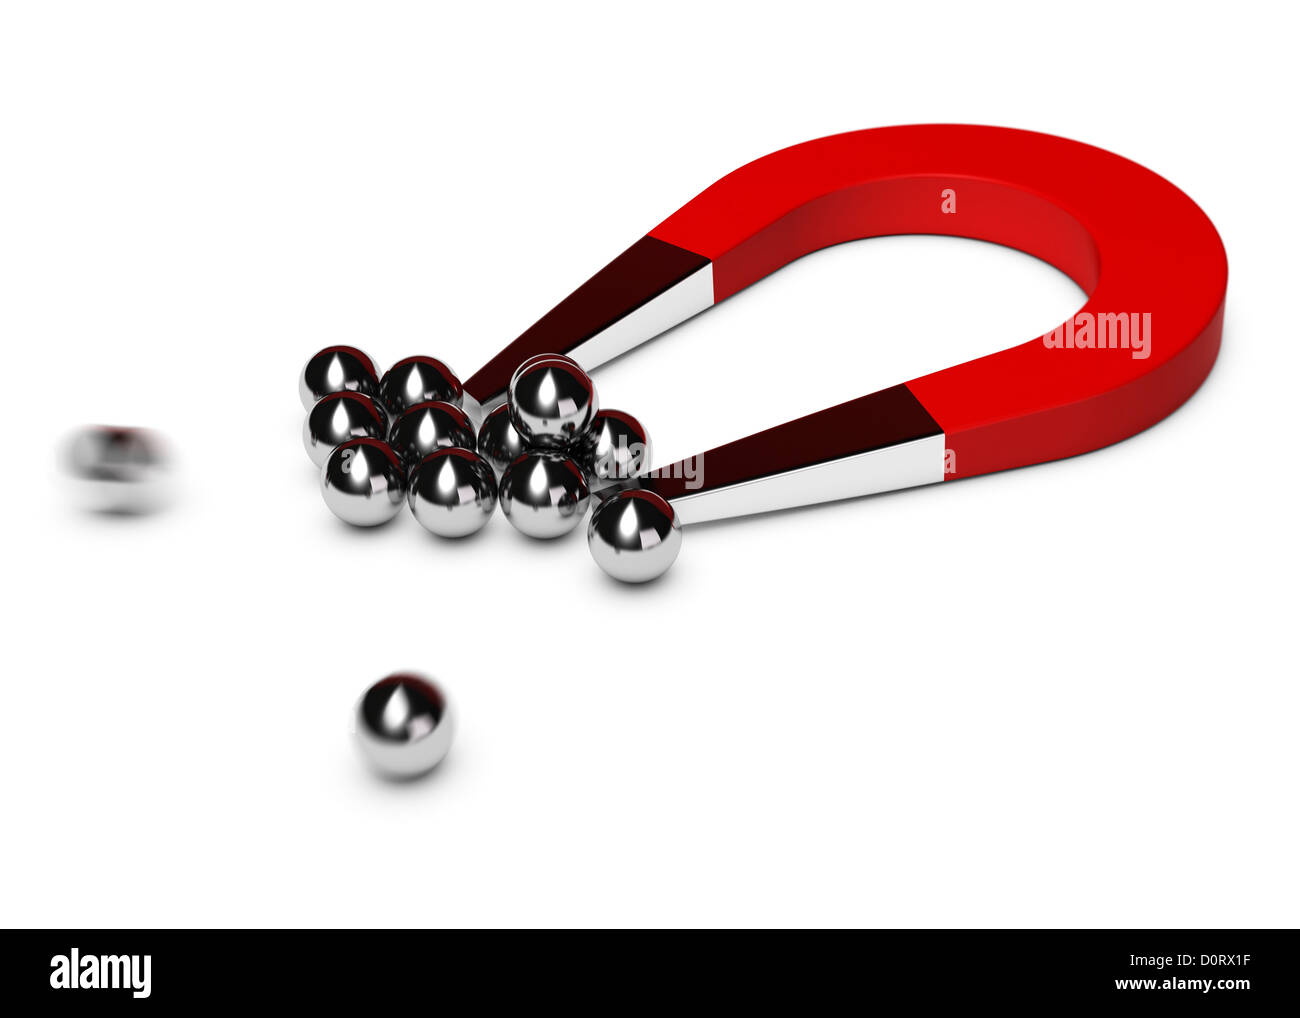 red horseshoe magnet attracting some chrome balls, white background Stock Photo